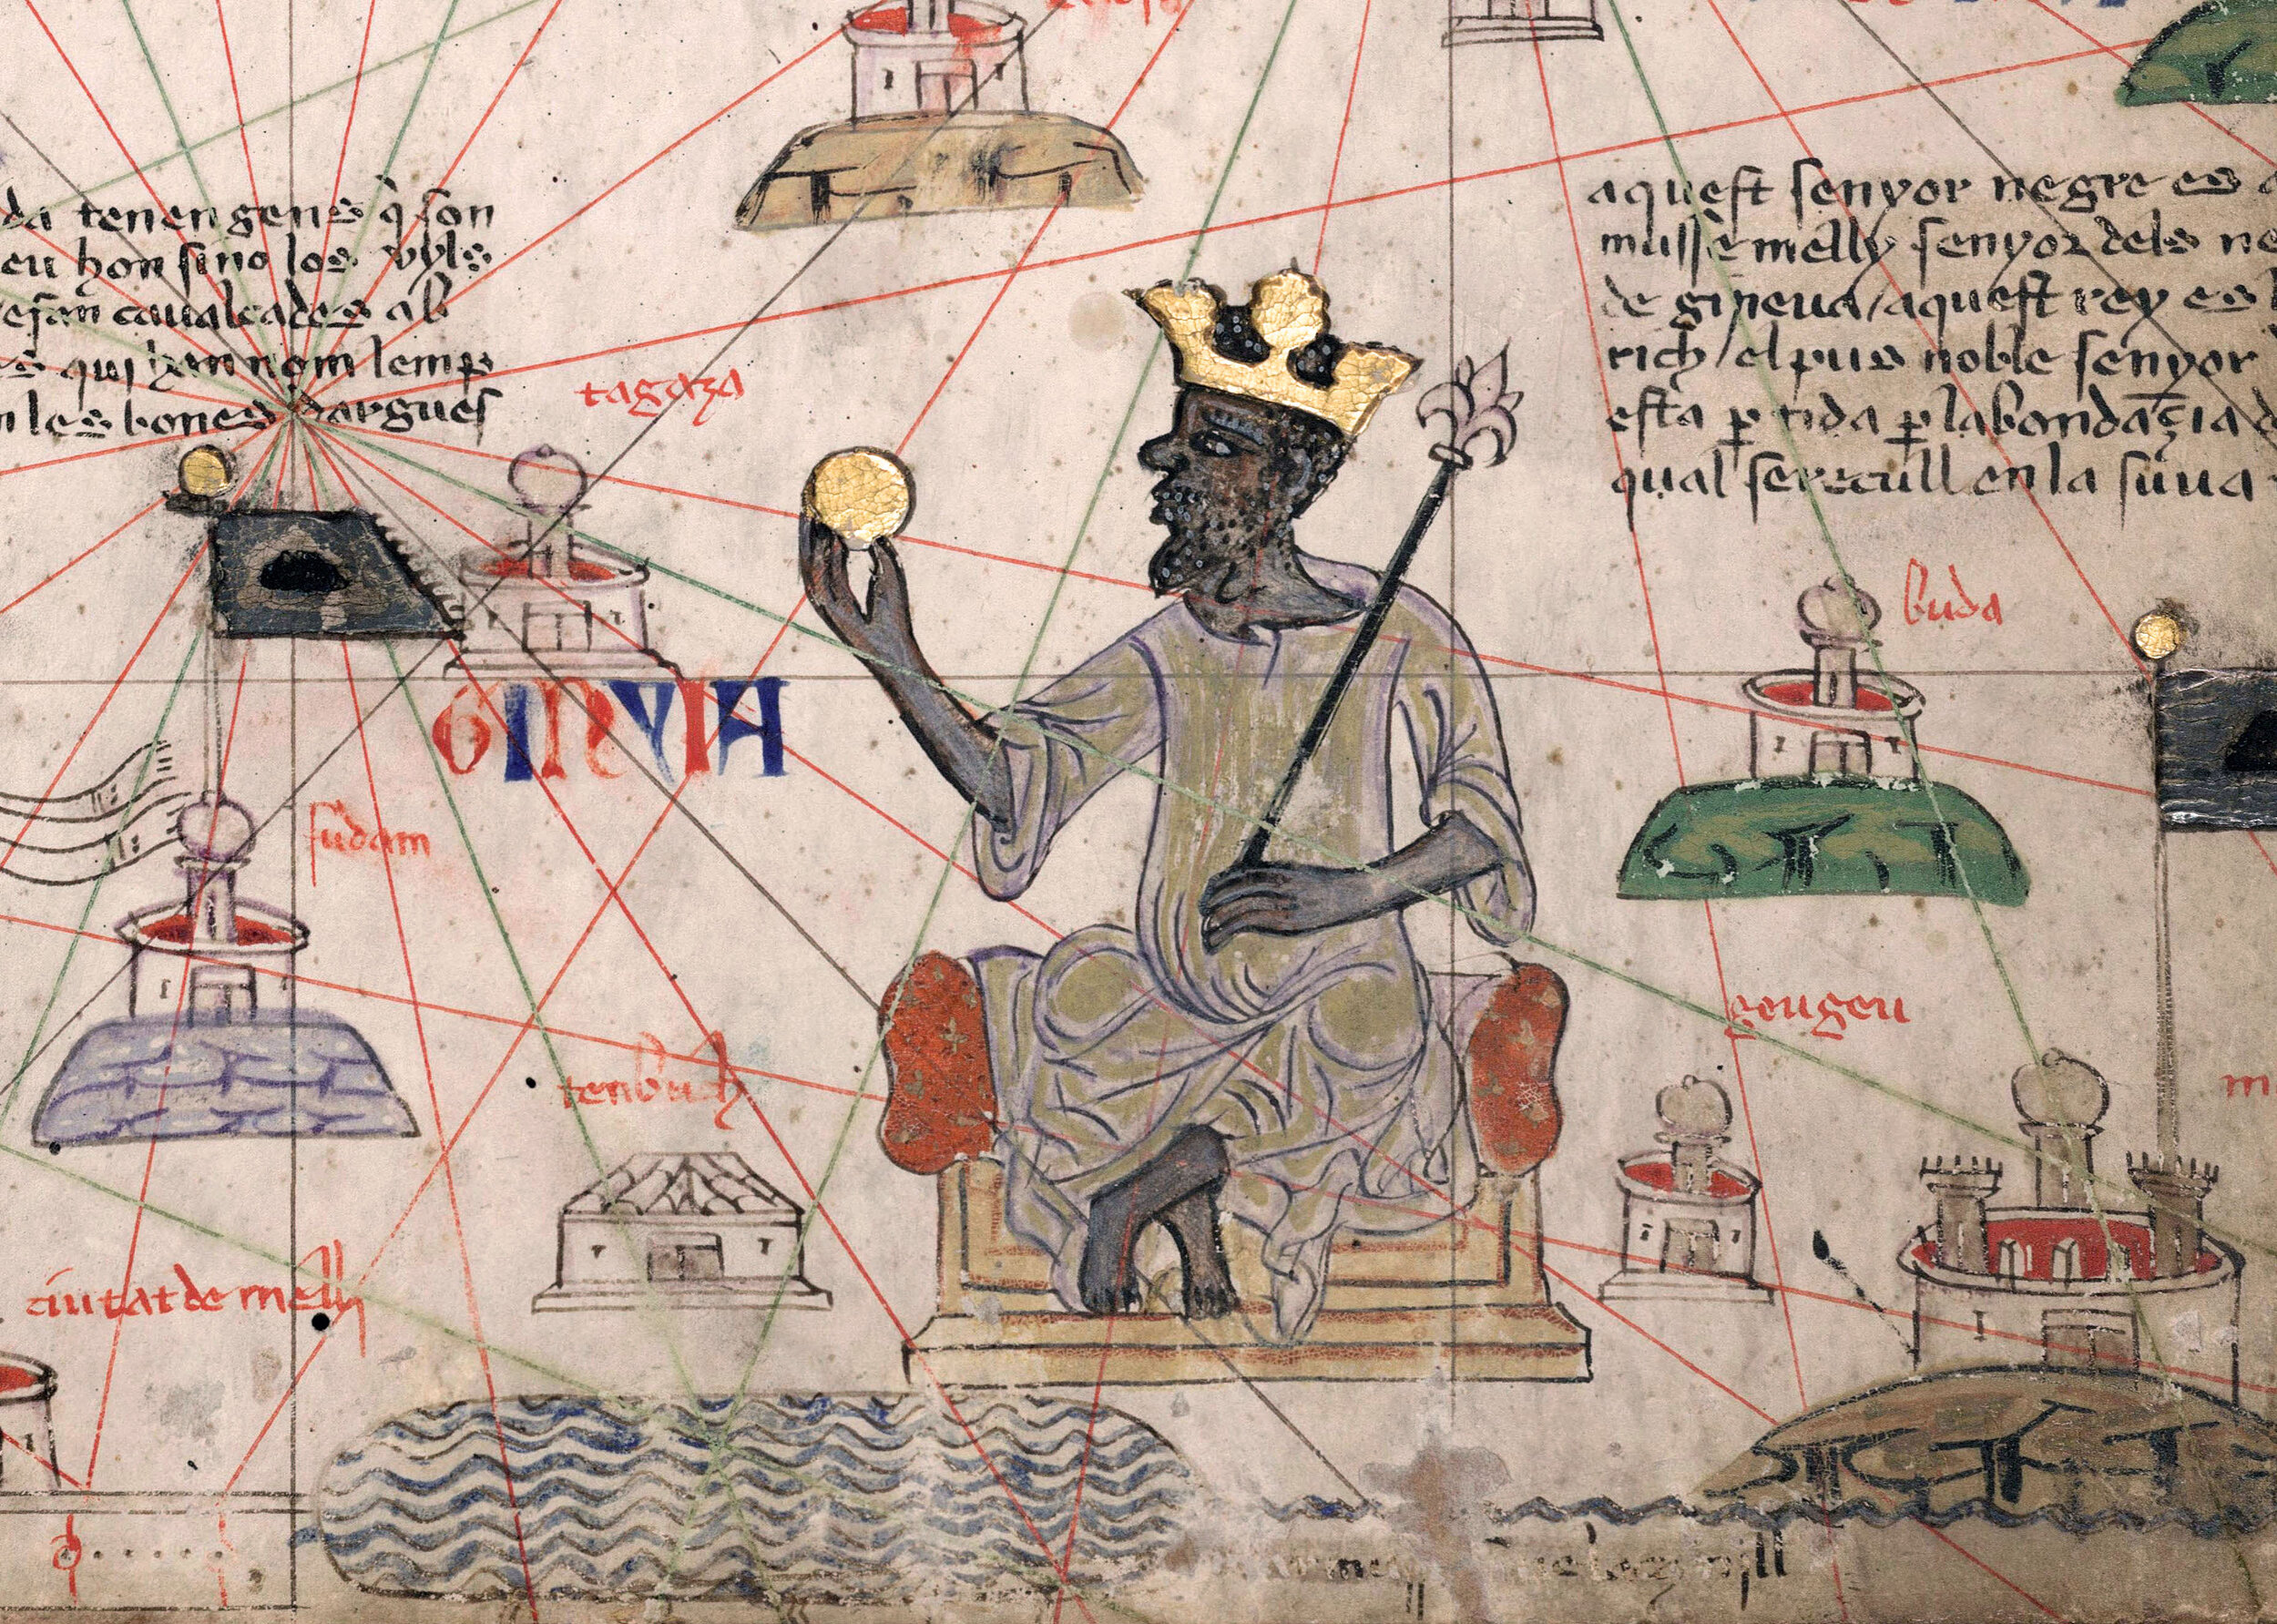 Mansa Musa's Pilgrimage to Mecca, 1325 (podcast) | Travels Through Time